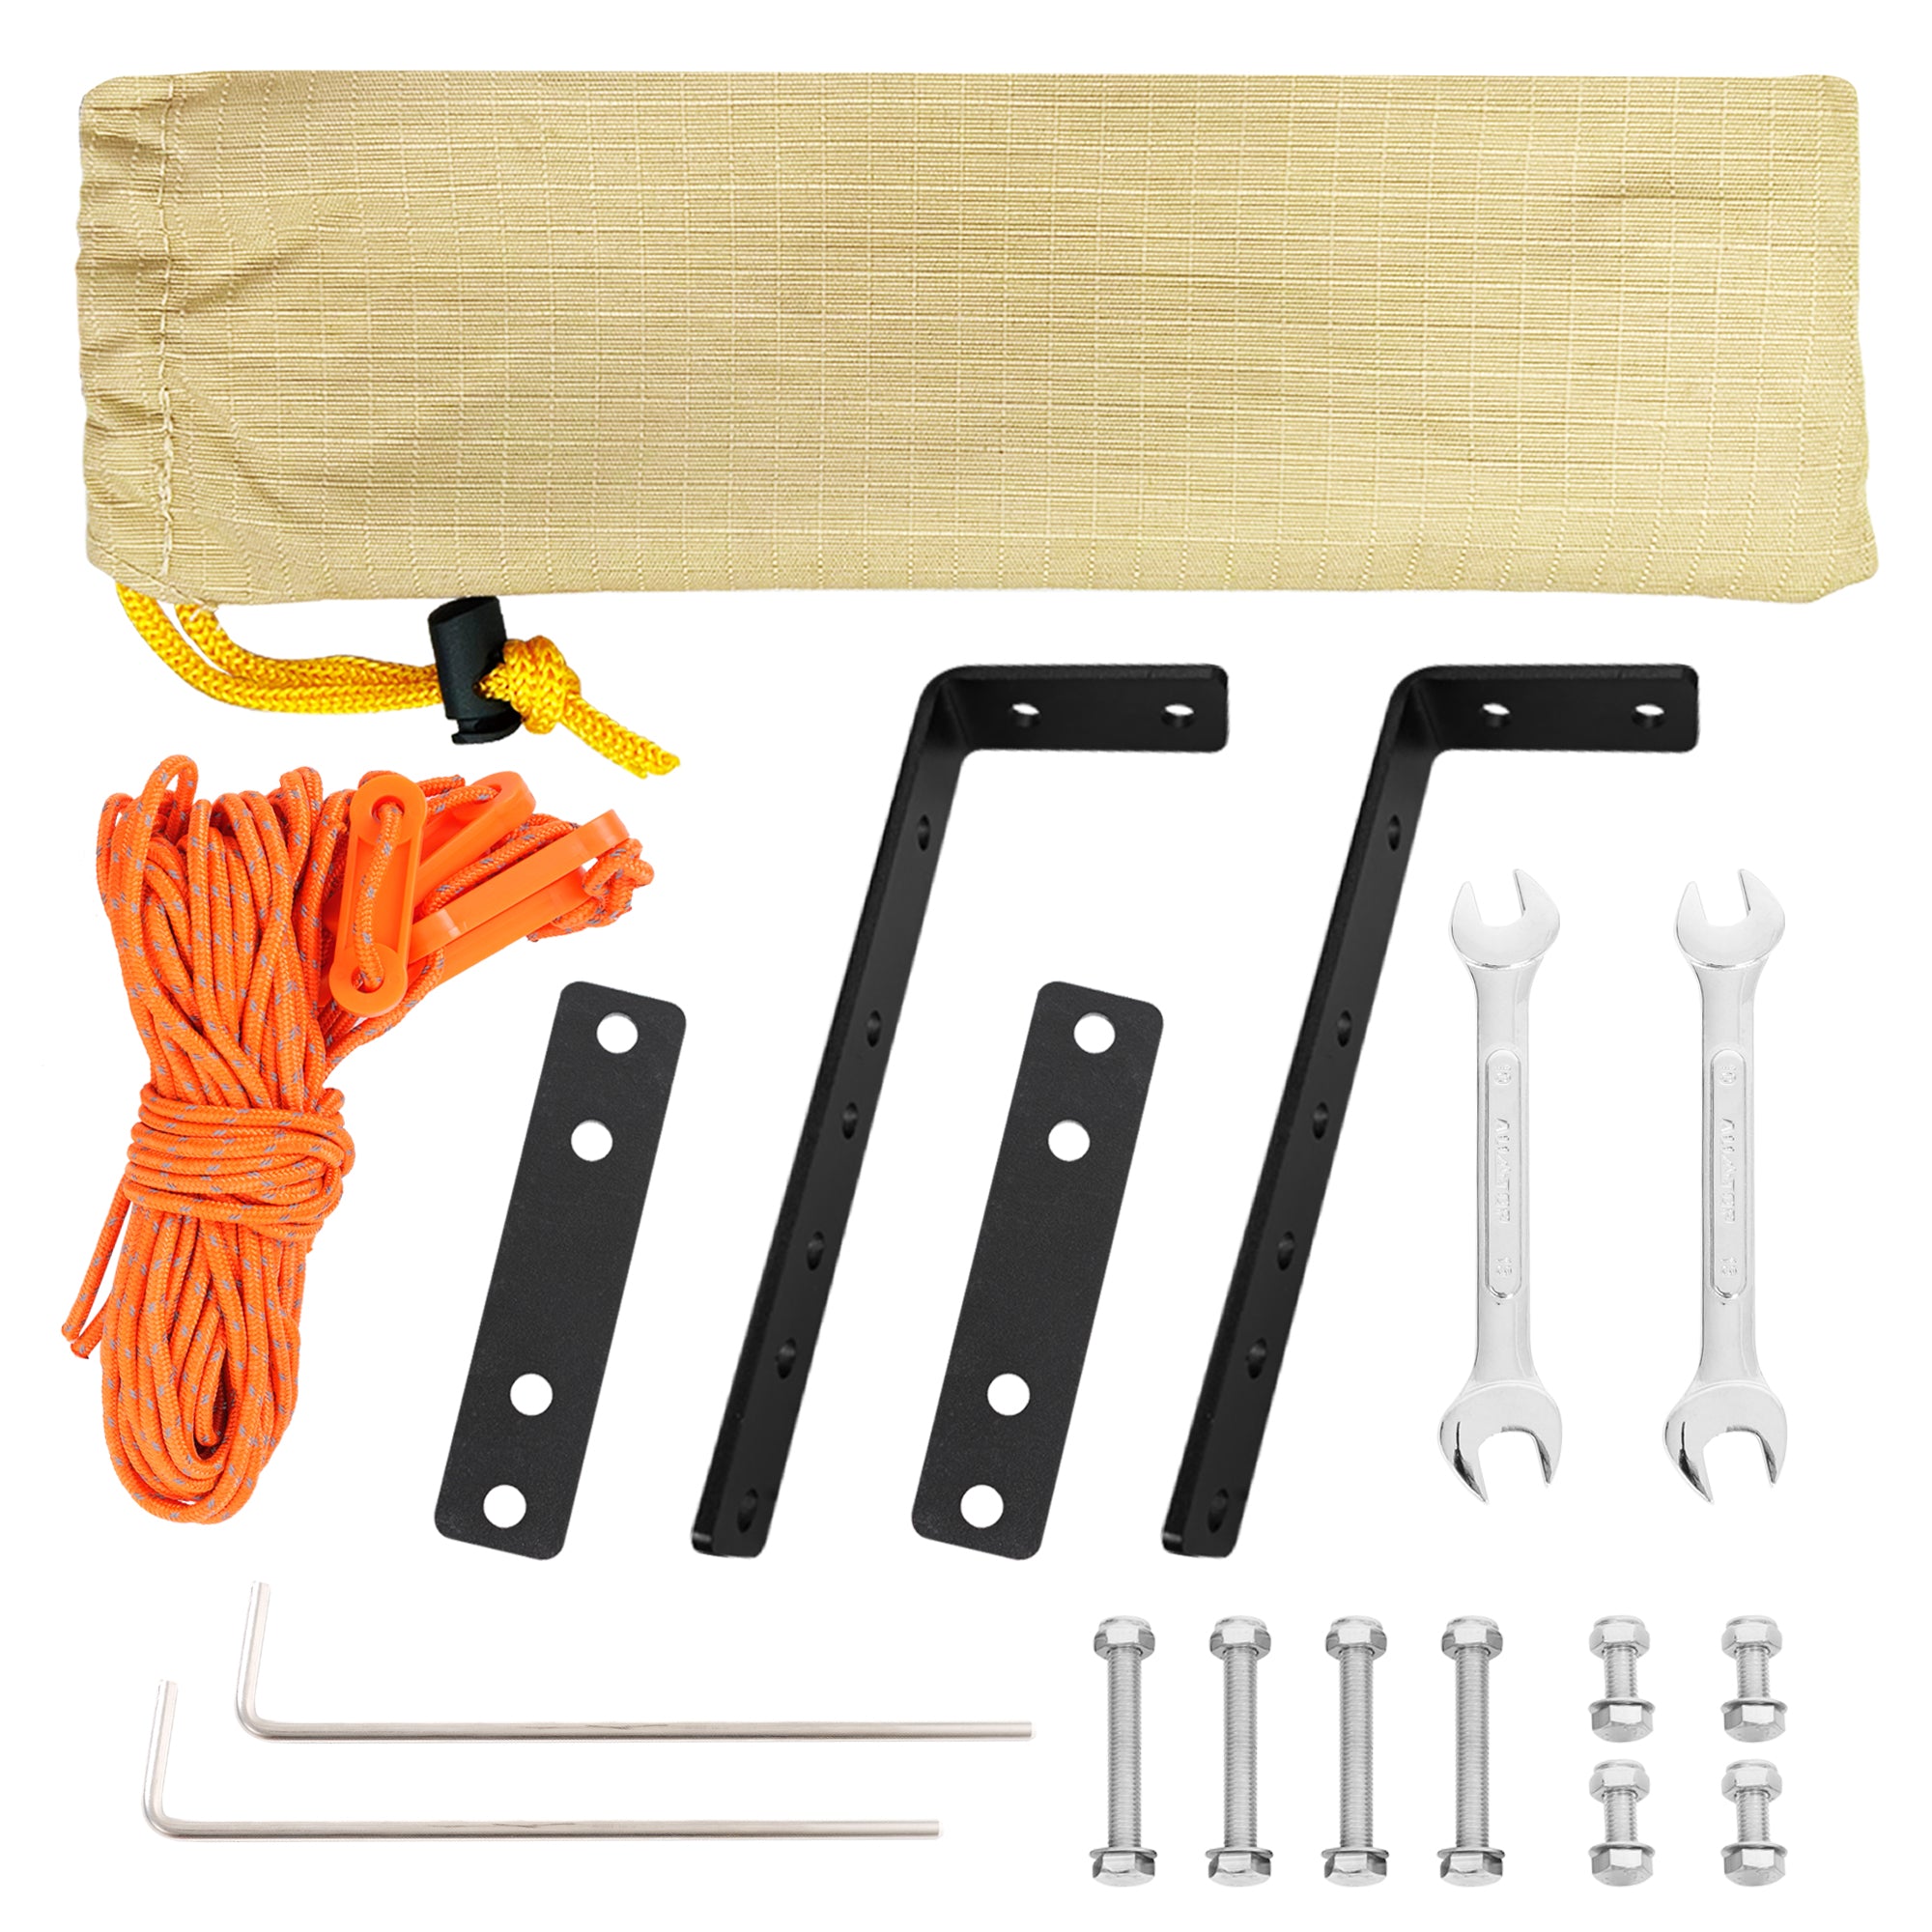 ALL-TOP Vehicle Awning Tools kit